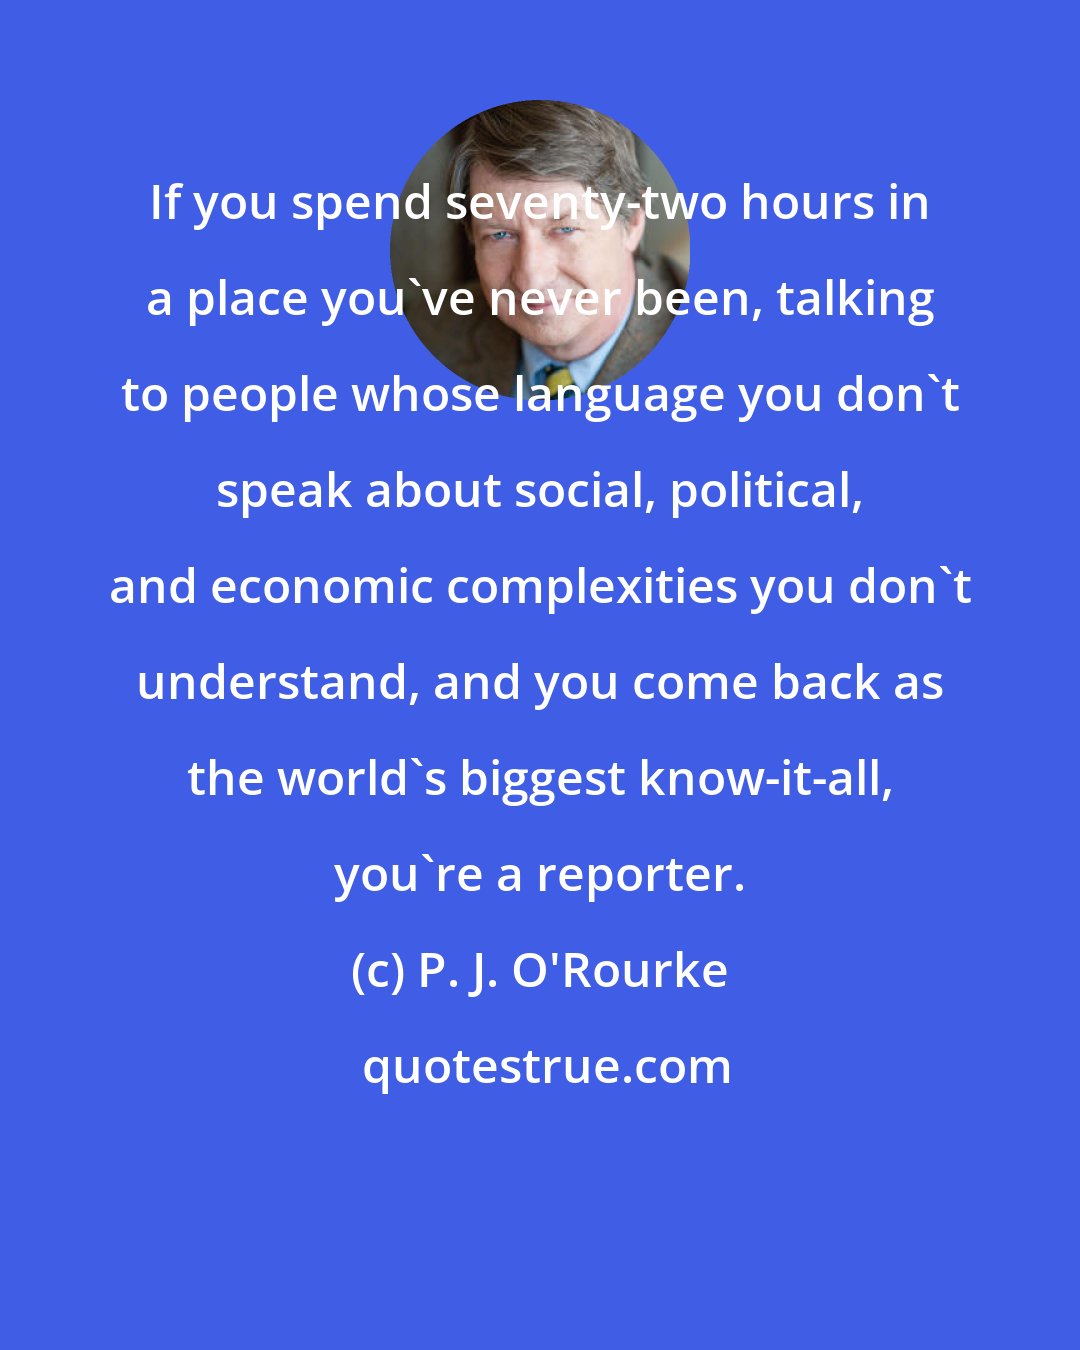 P. J. O'Rourke: If you spend seventy-two hours in a place you've never been, talking to people whose language you don't speak about social, political, and economic complexities you don't understand, and you come back as the world's biggest know-it-all, you're a reporter.